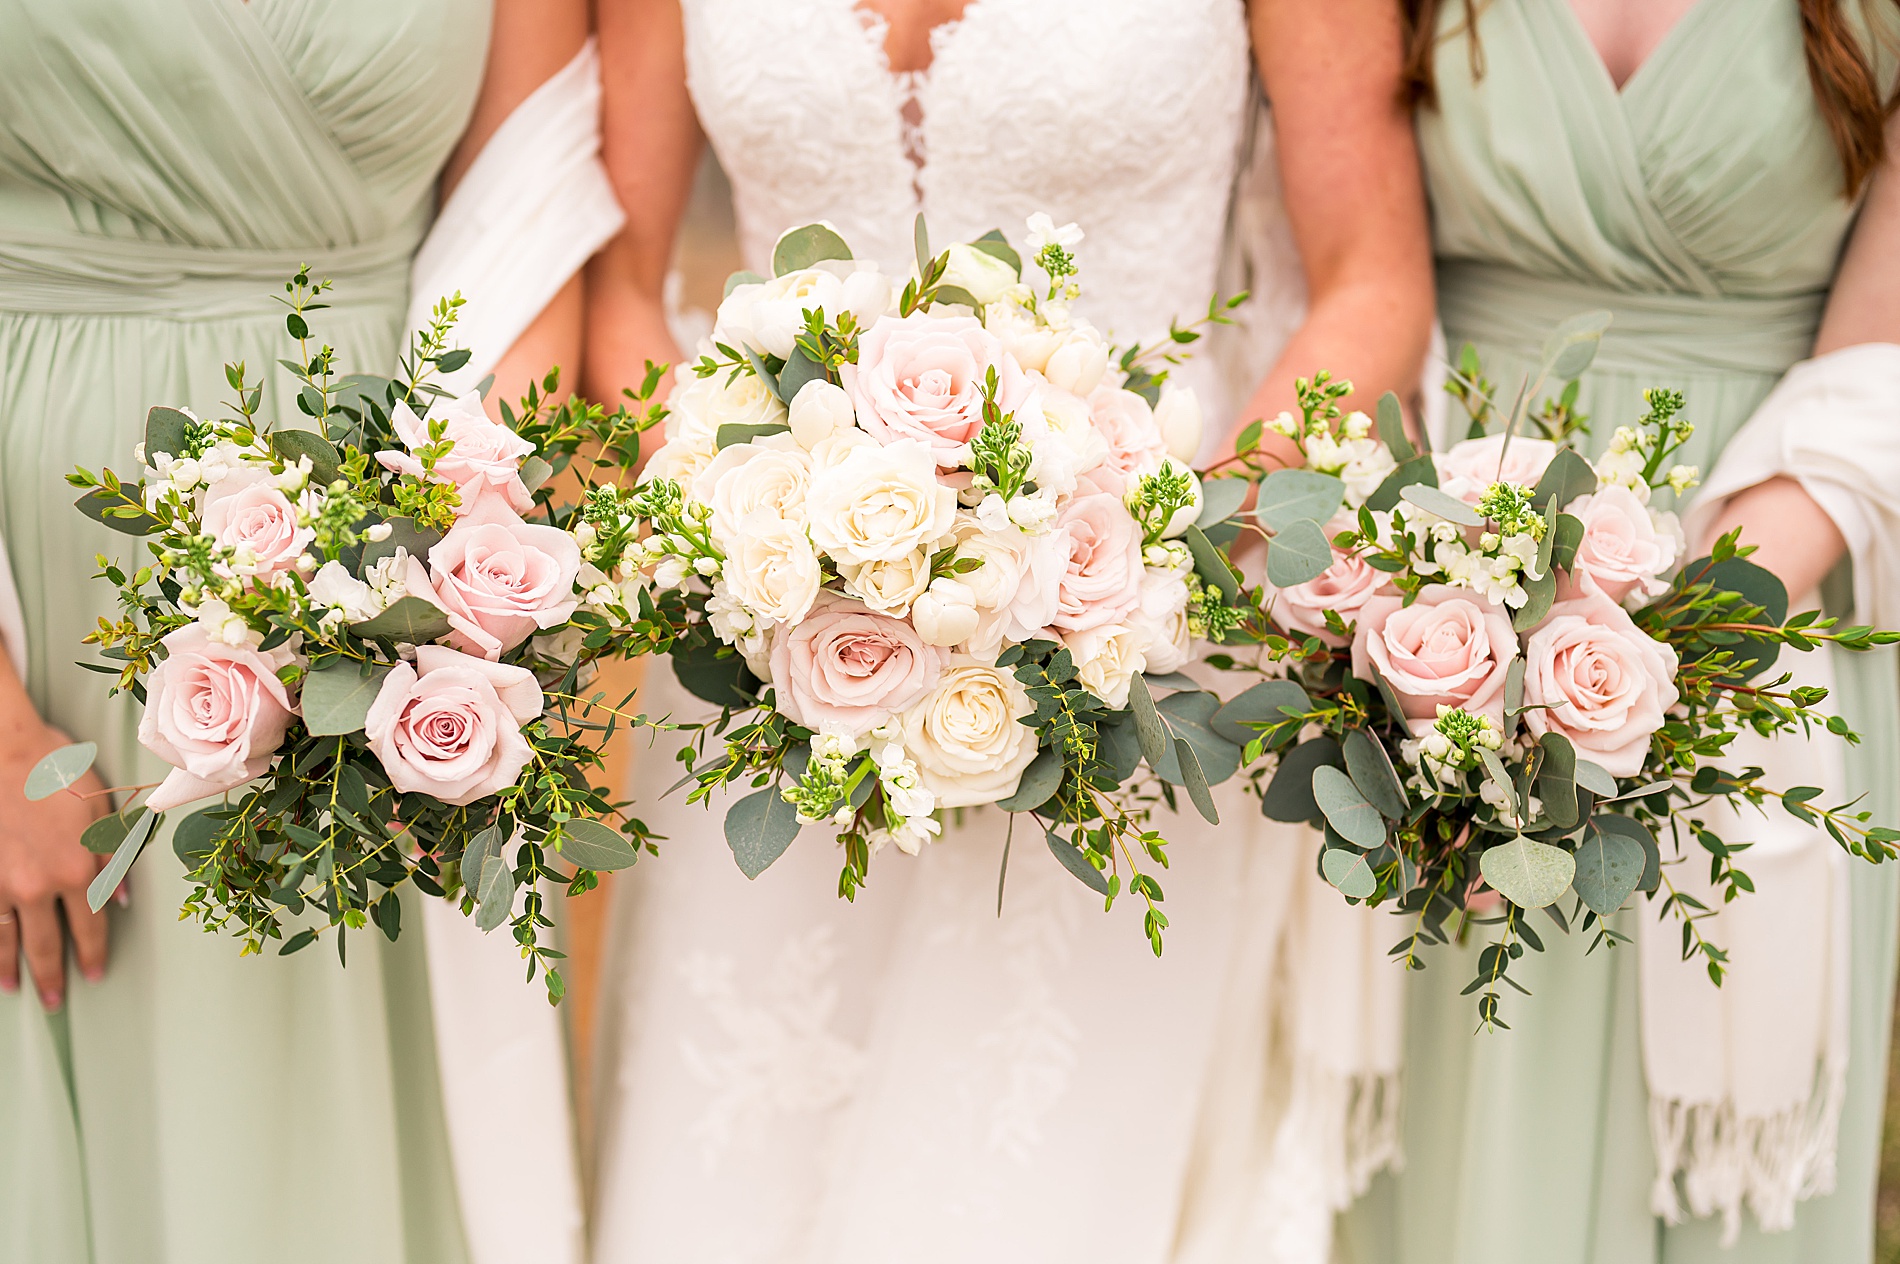 spring wedding bouquets of white and pale pink roses with greenery